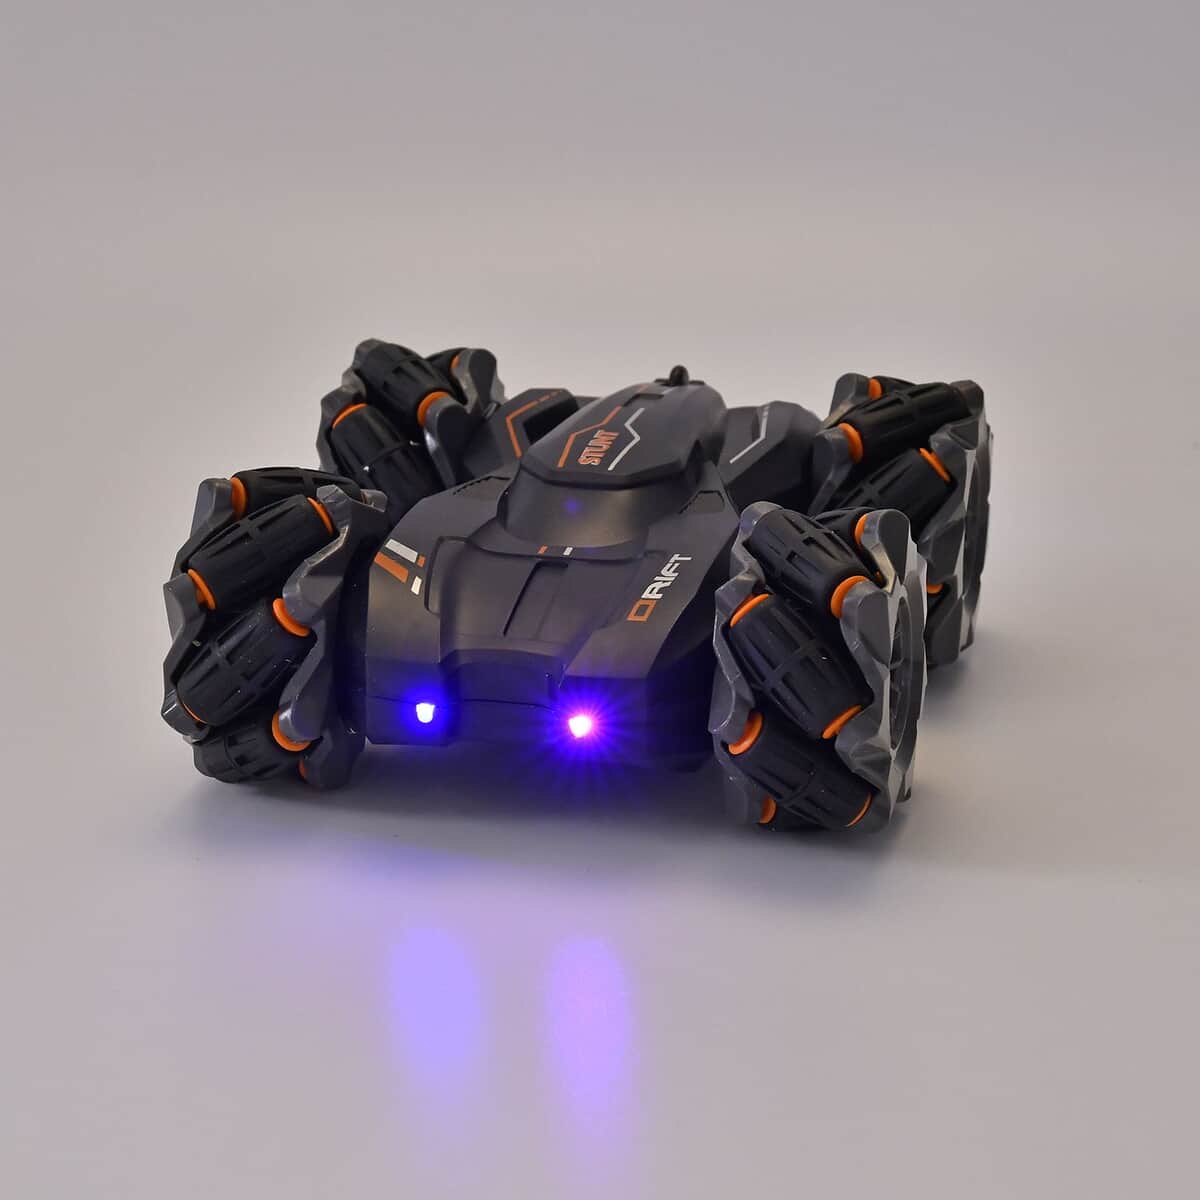 8 Channels Remote Control Double-sided Stunt Drift Car with Lights and Music - Orange (2xAA Battery Not Included) image number 1